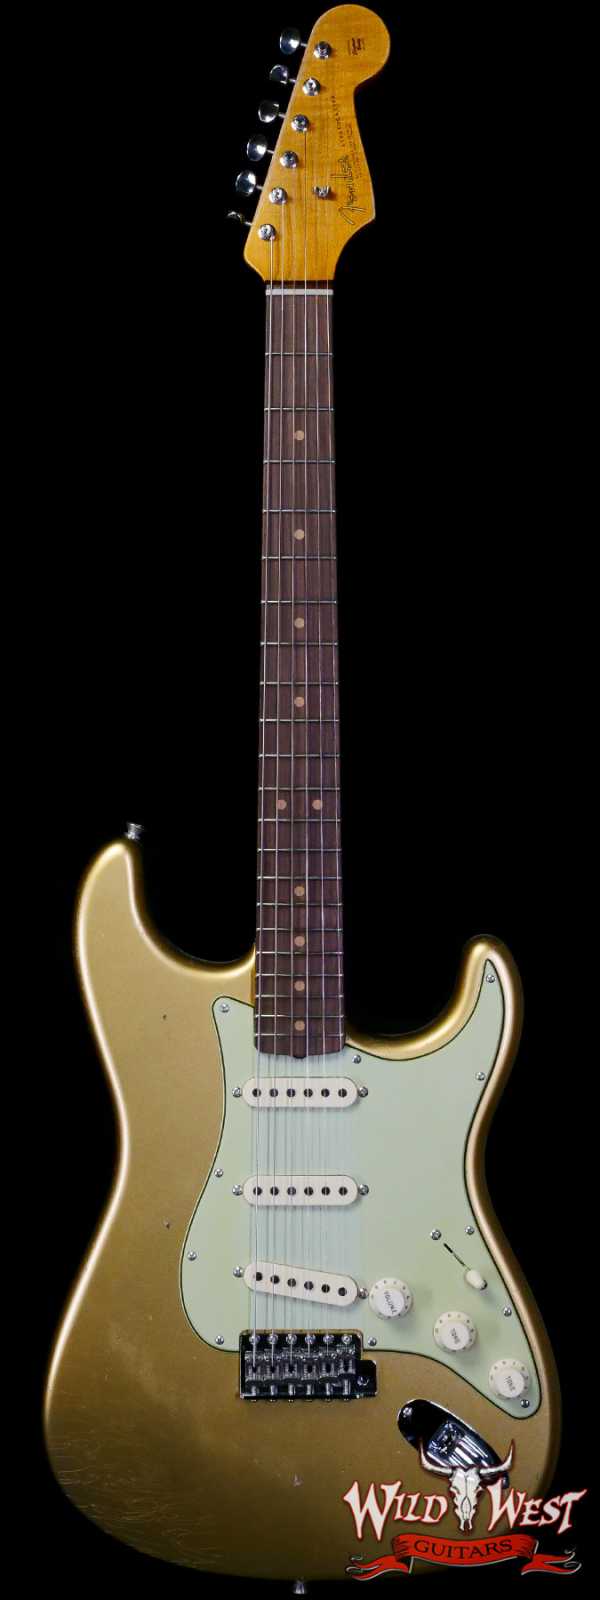 Fender Custom Shop Limited Edition 1964 Stratocaster Hand-Wound Pickups Closet Classic Hardware Journeyman Relic Aged Aztec Gold